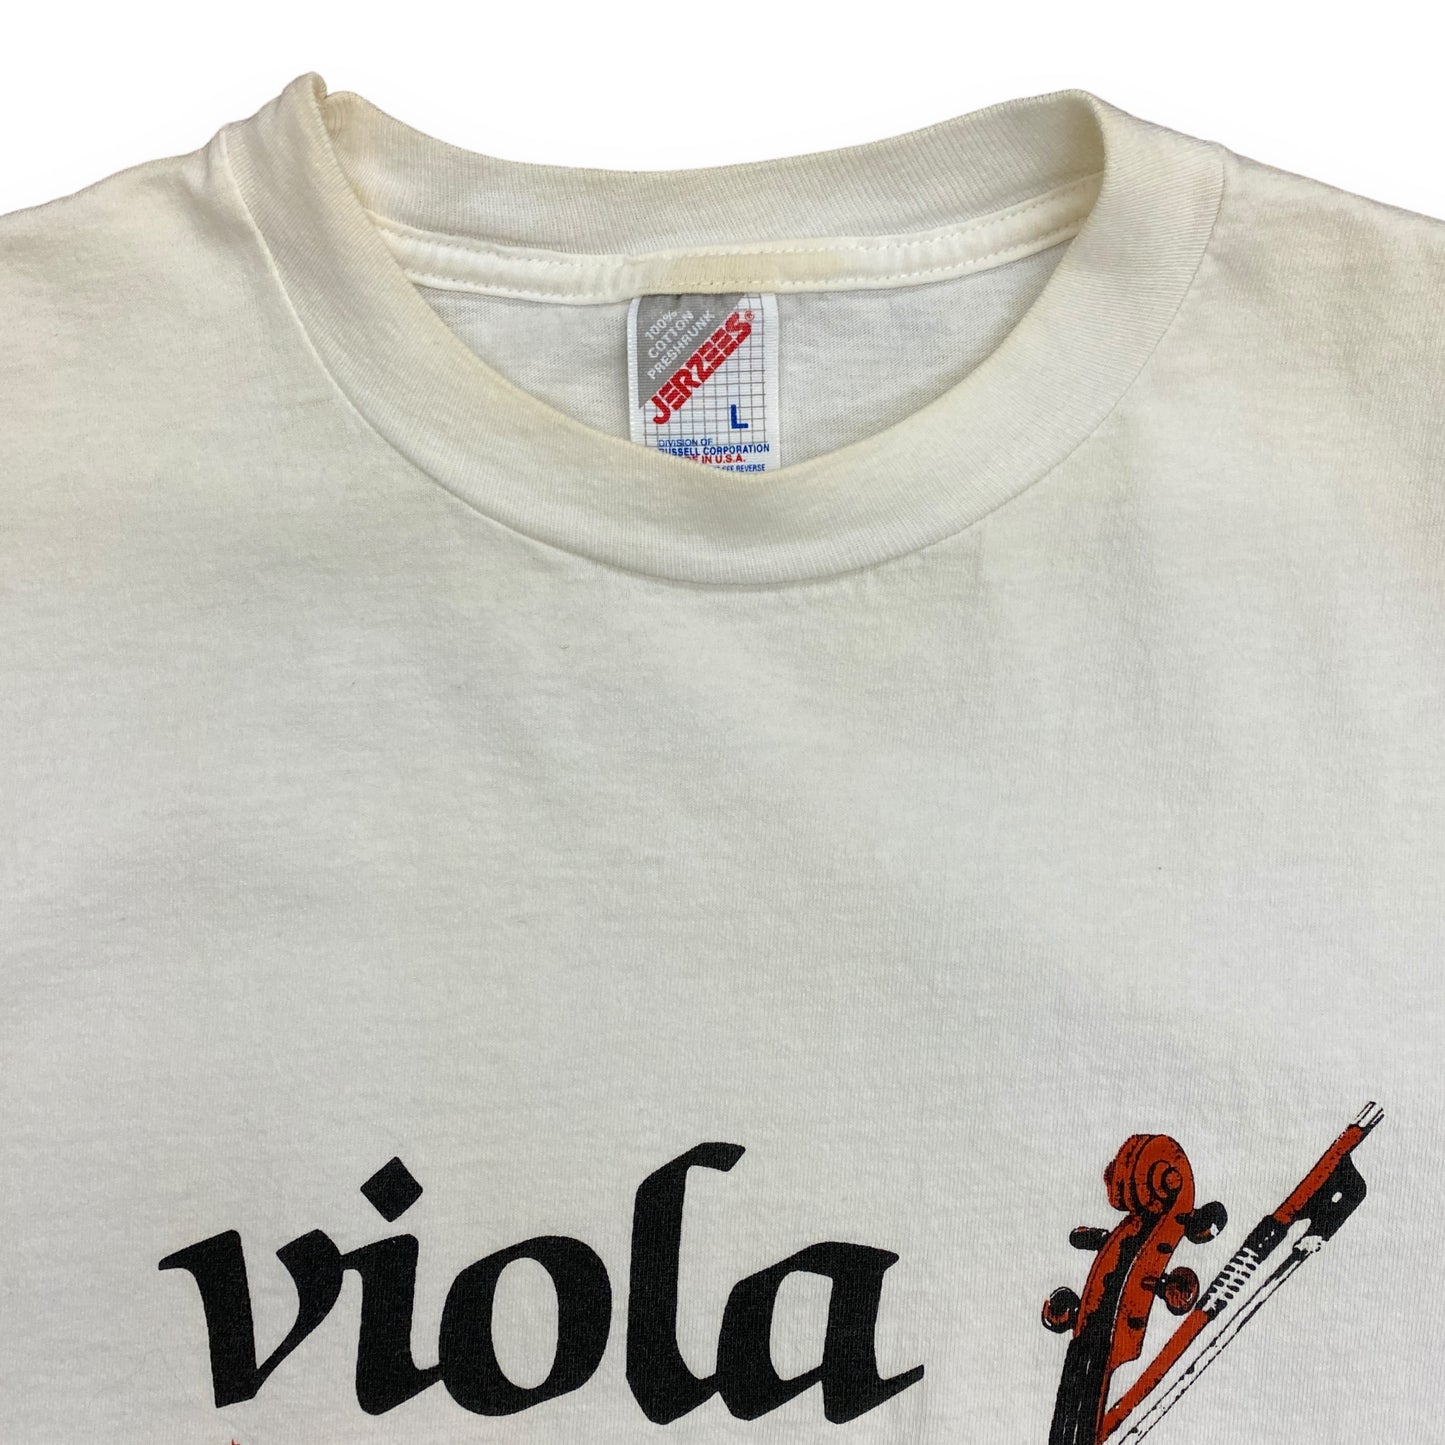 1980s "Viola" Graphic Tee - Size Large